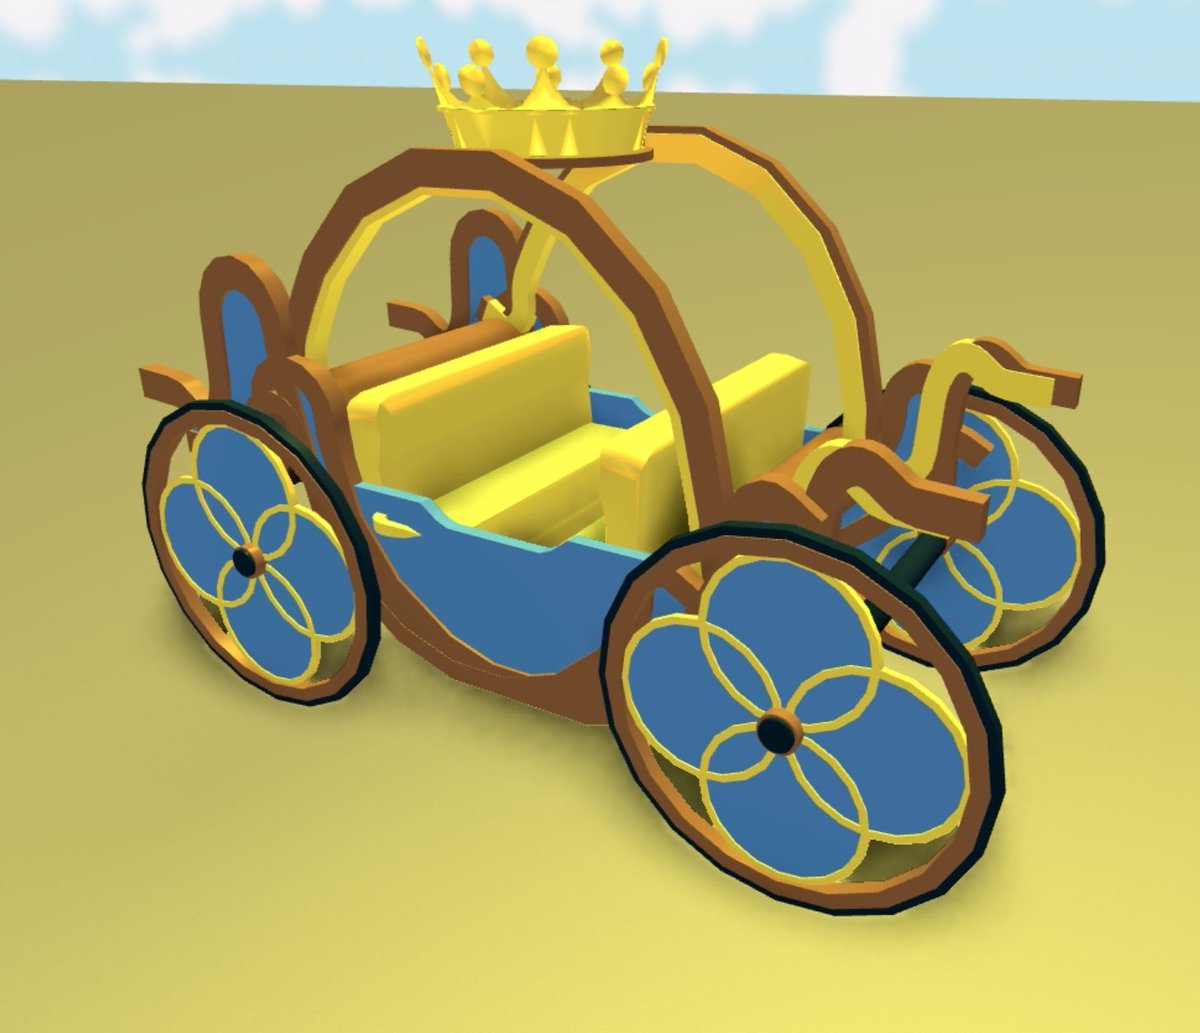 Bethink On Twitter I Wonder What This Could Be For Roblox Robloxdev - adopt meroyal carriages roblox instructions for